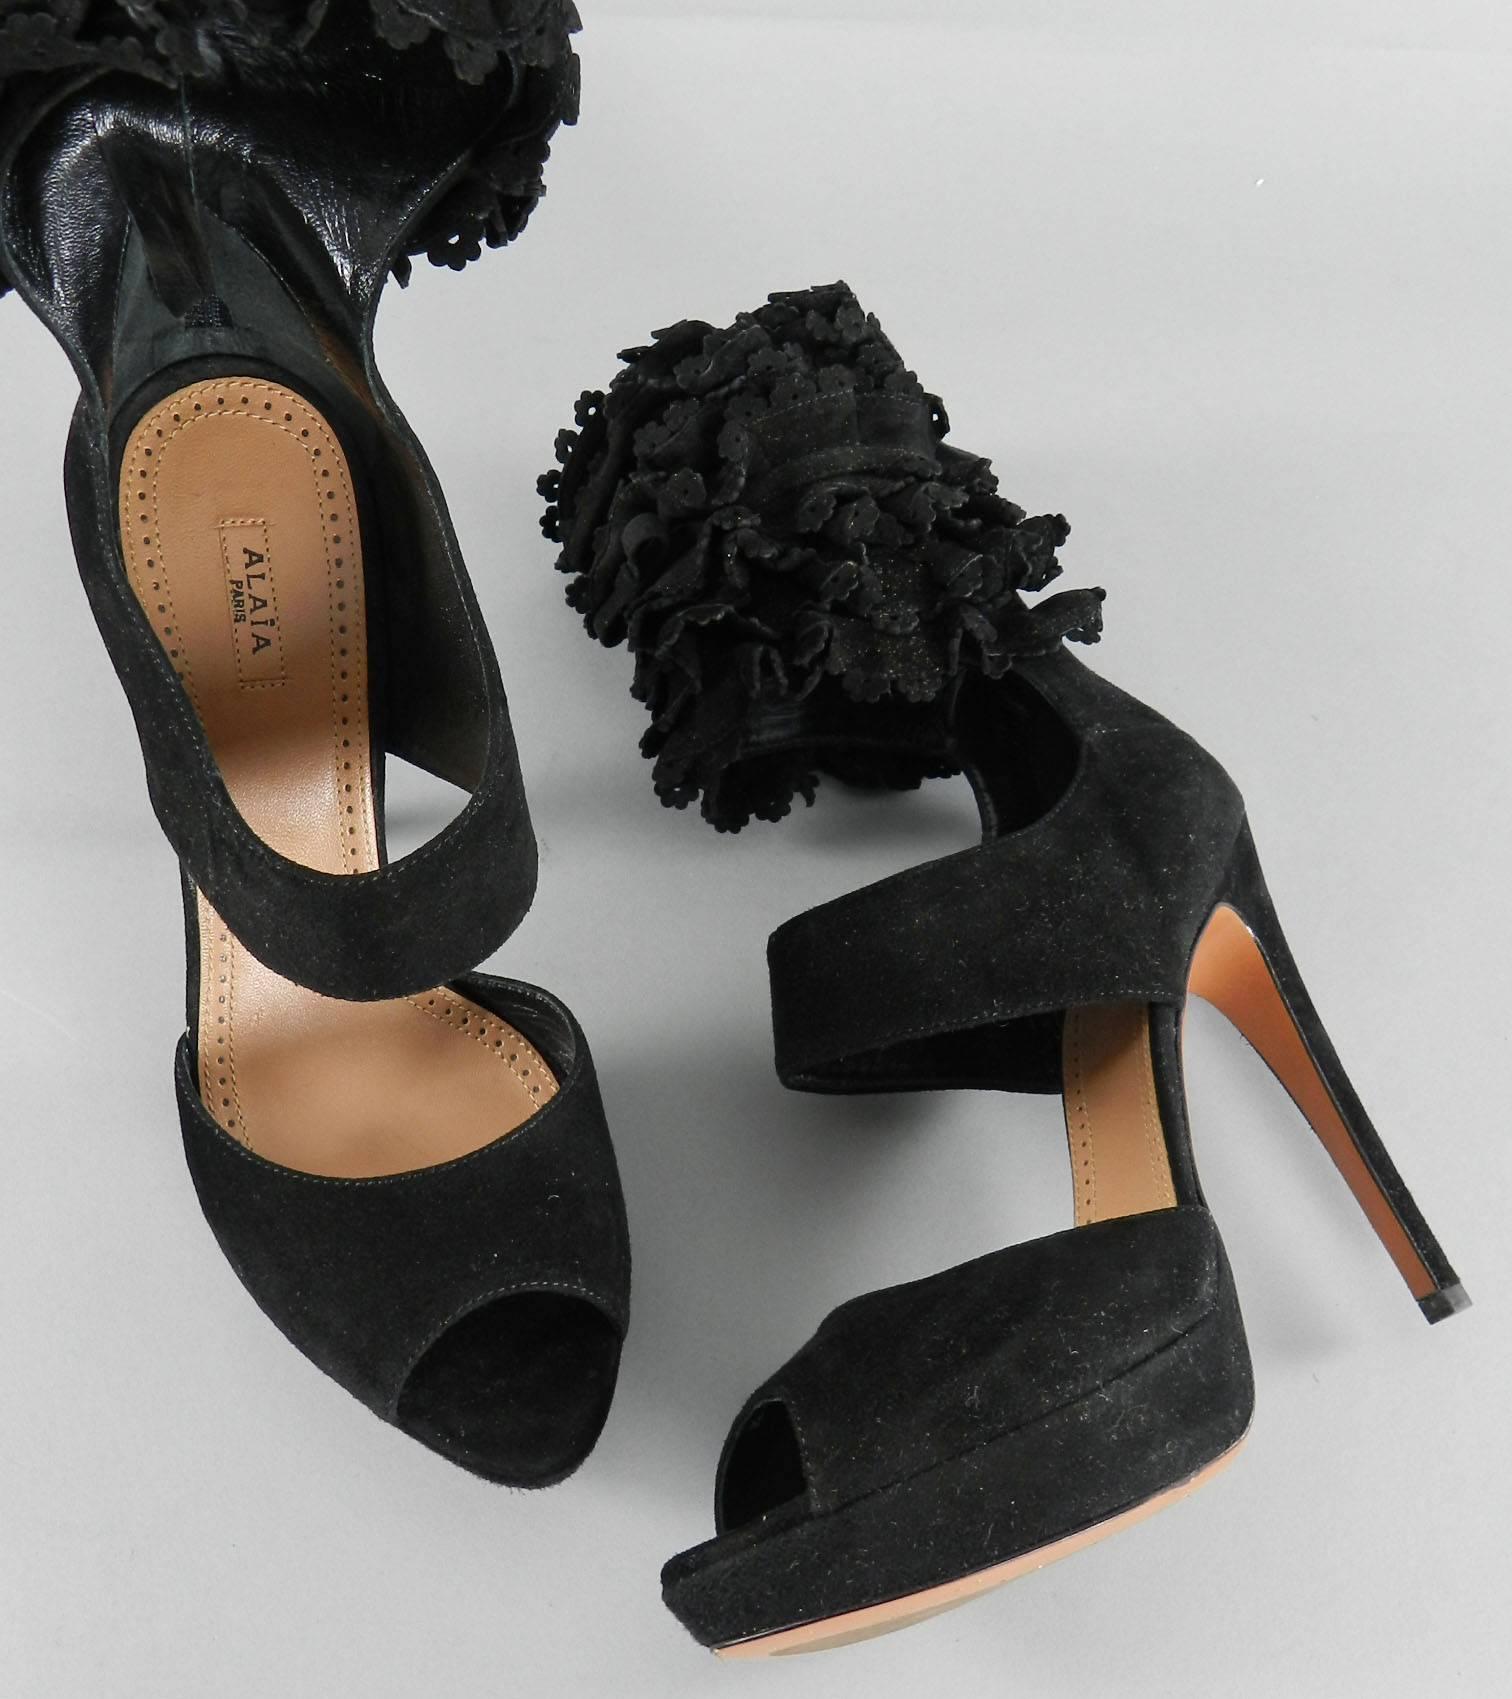 Alaia black suede ruffle cut out stiletto heels. Marked size 41 (USA 10.5). Excellent preowned condition - worn once. 5.5